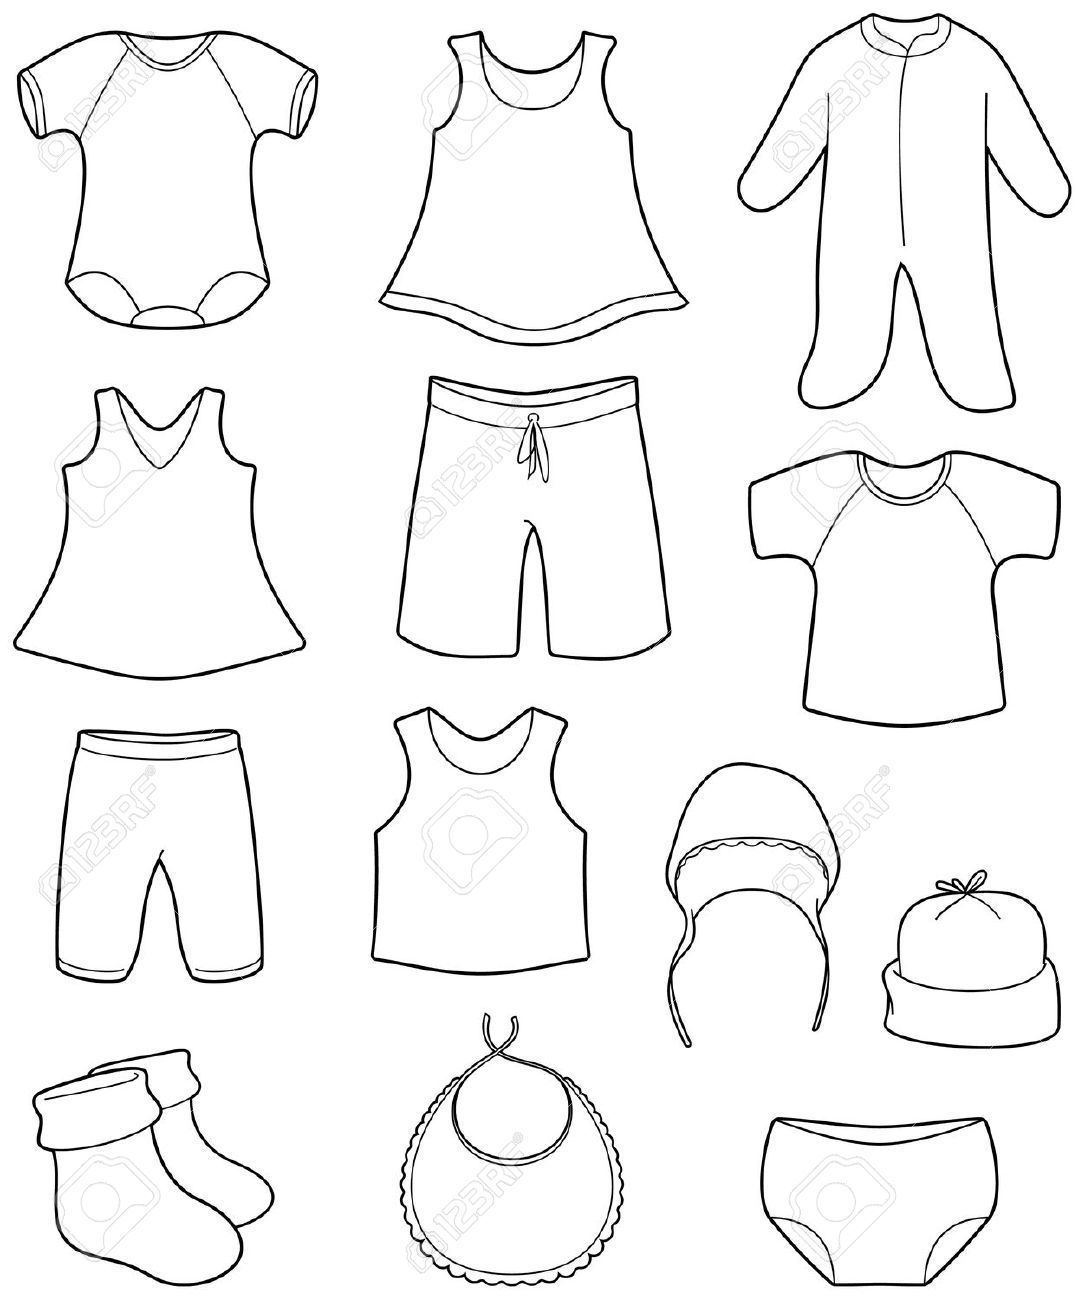 Clothing clipart cotton cloth. Topic for black and